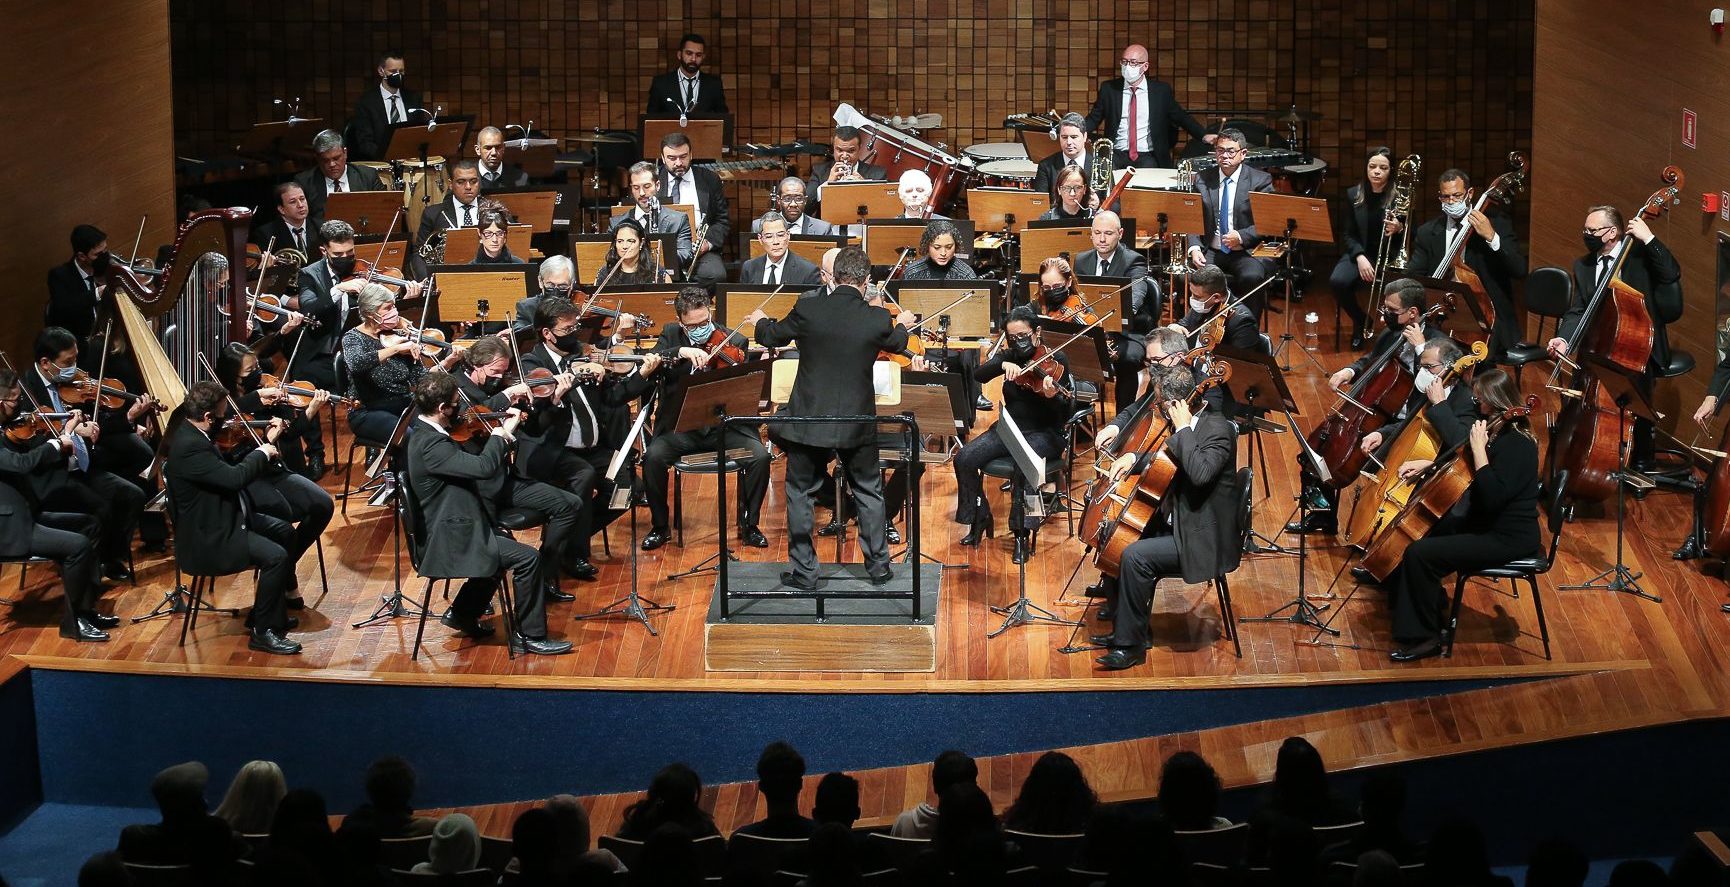 From Villa-Lobos to Bach, five free concerts by the USP Symphony Orchestra in São Paulo